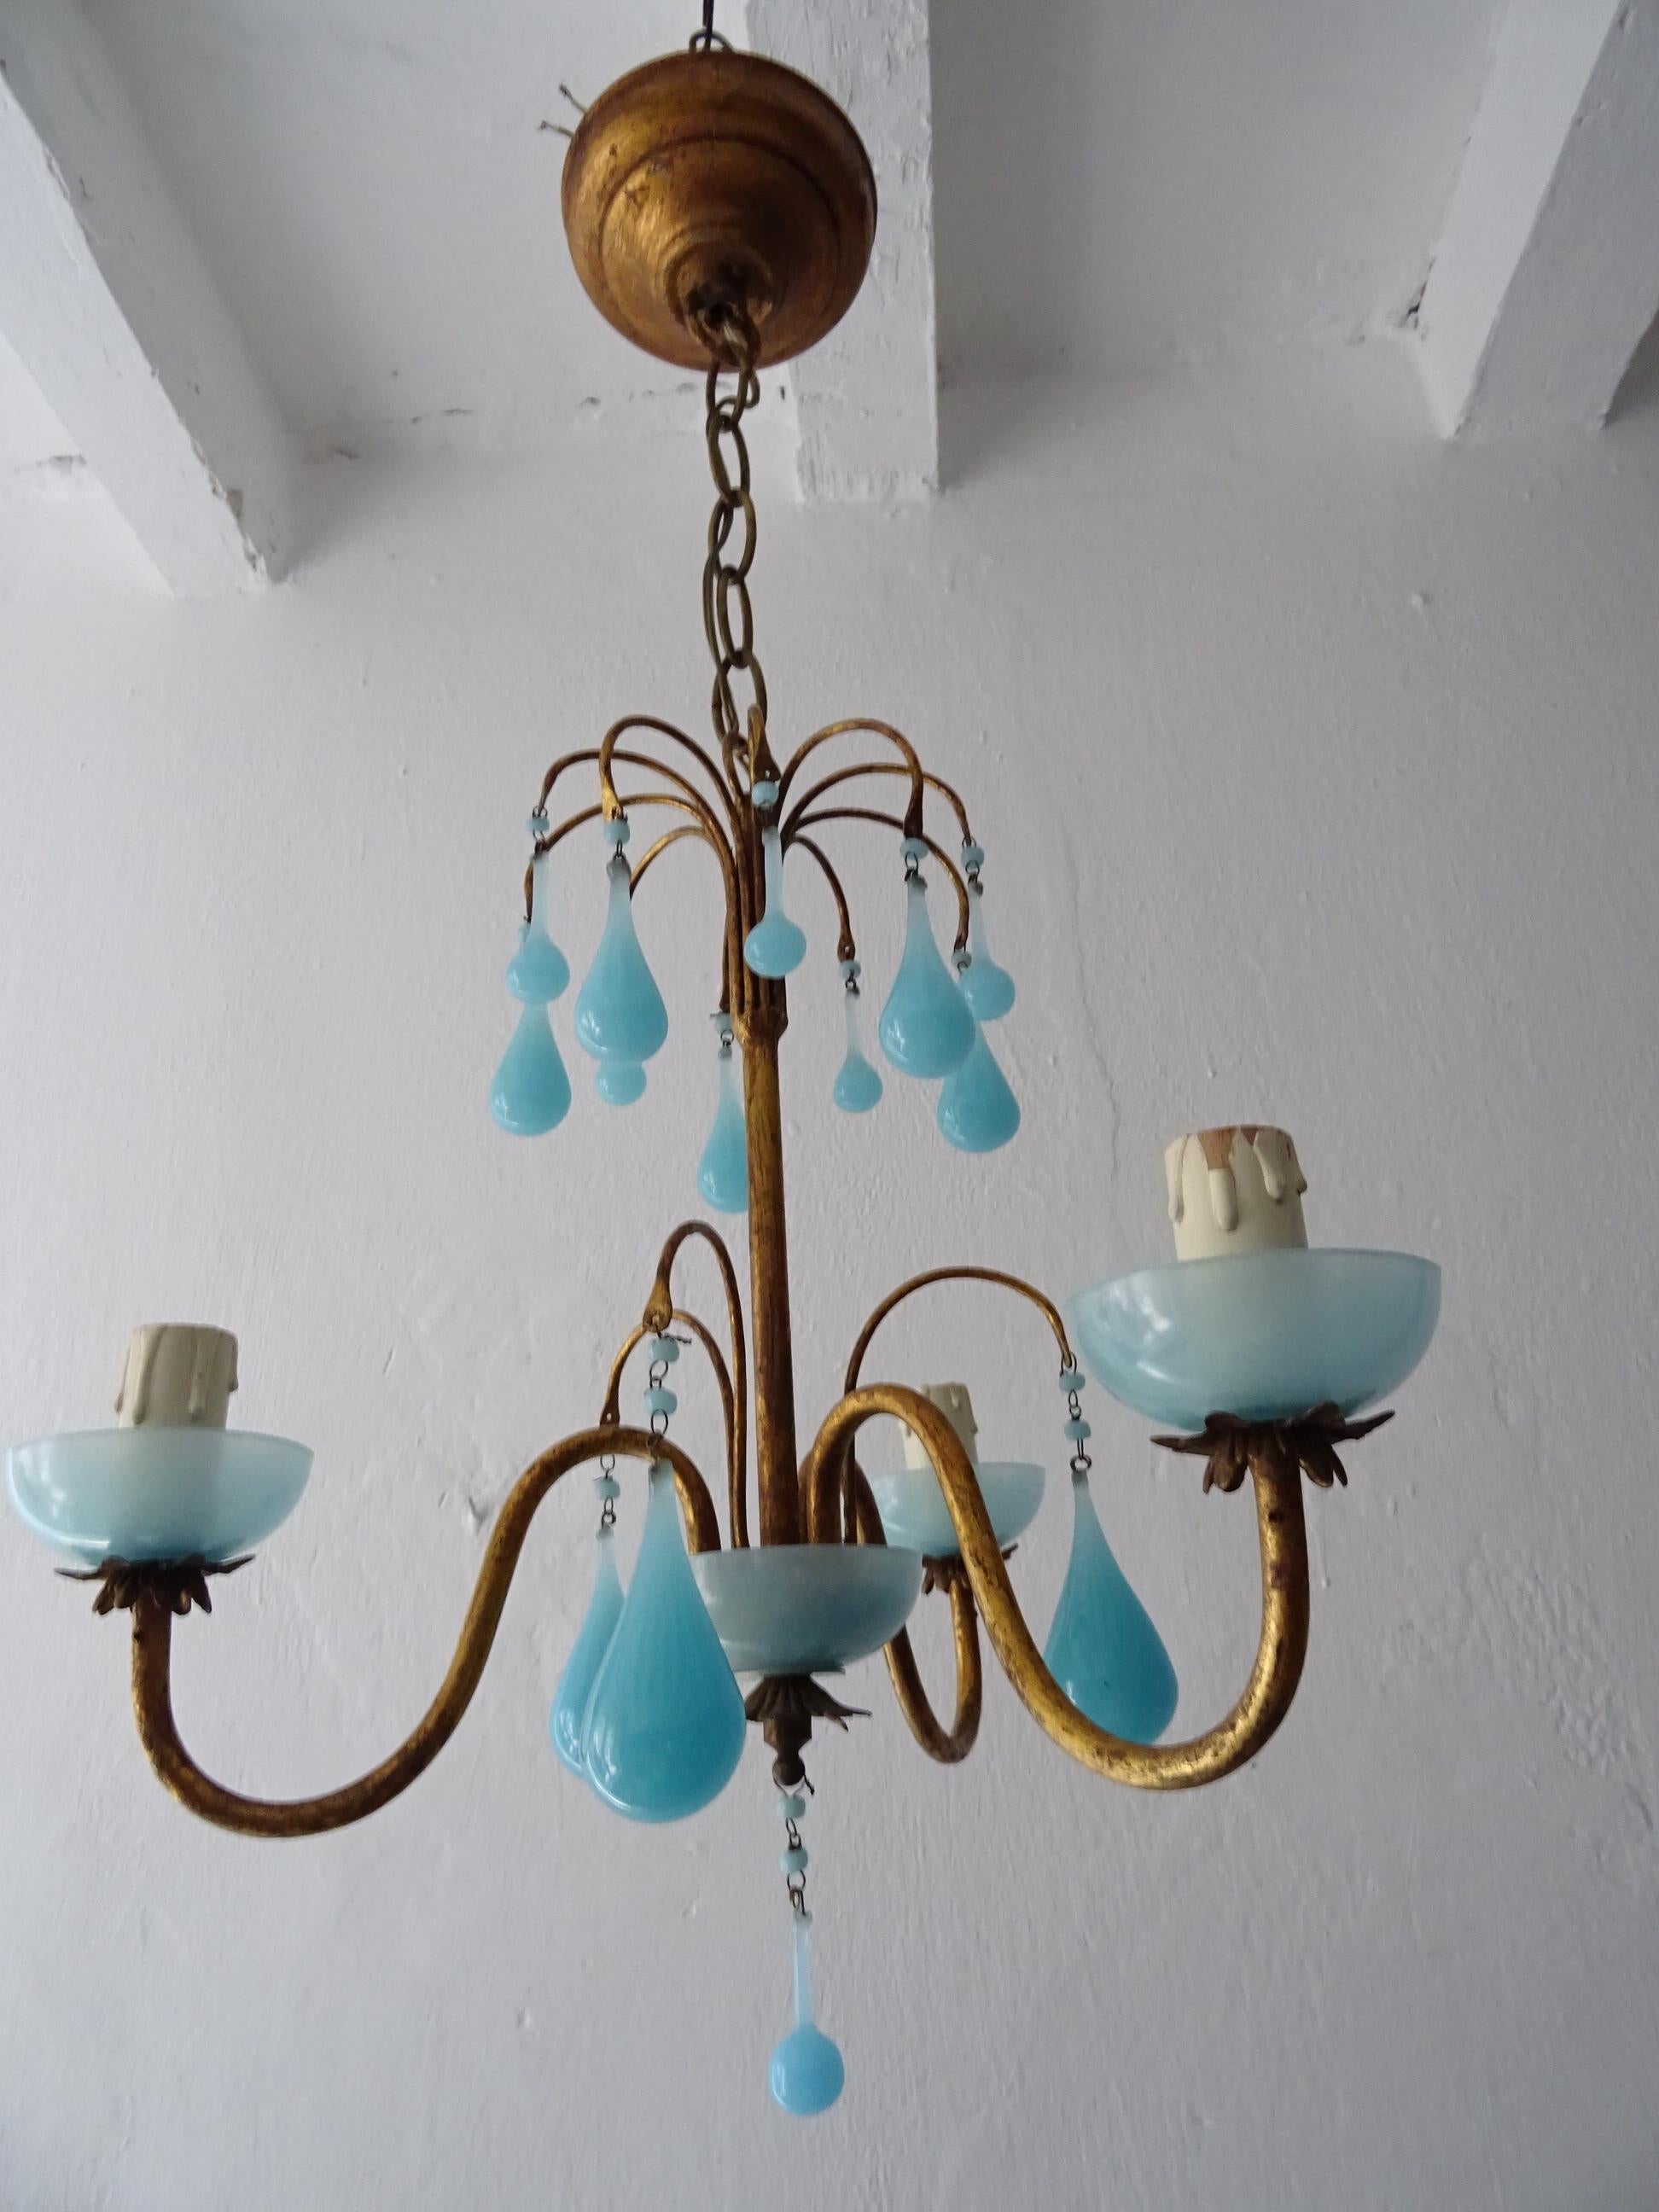 1930 French Blue Opaline Bobeches, Beads and Drops Chandelier In Good Condition For Sale In Firenze, Toscana